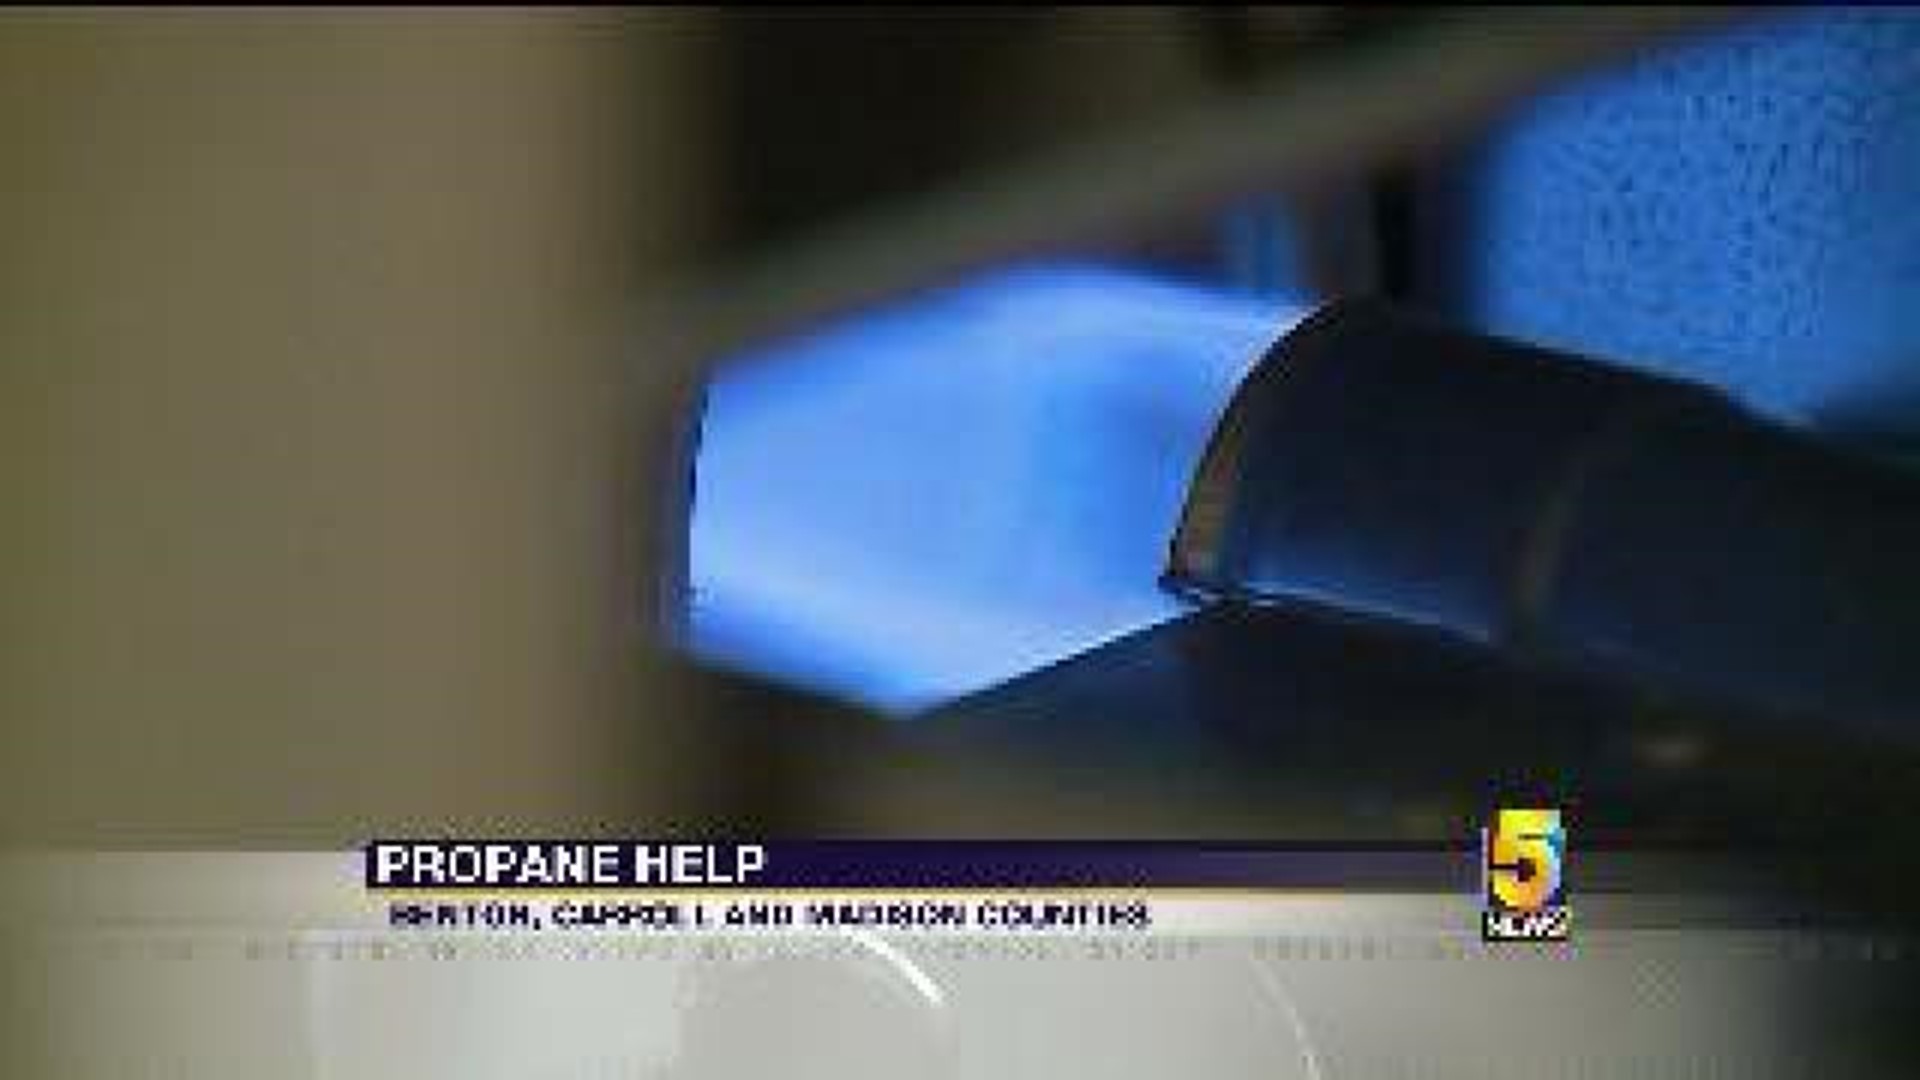 Organization Helps Low Income Families With Propane Bills